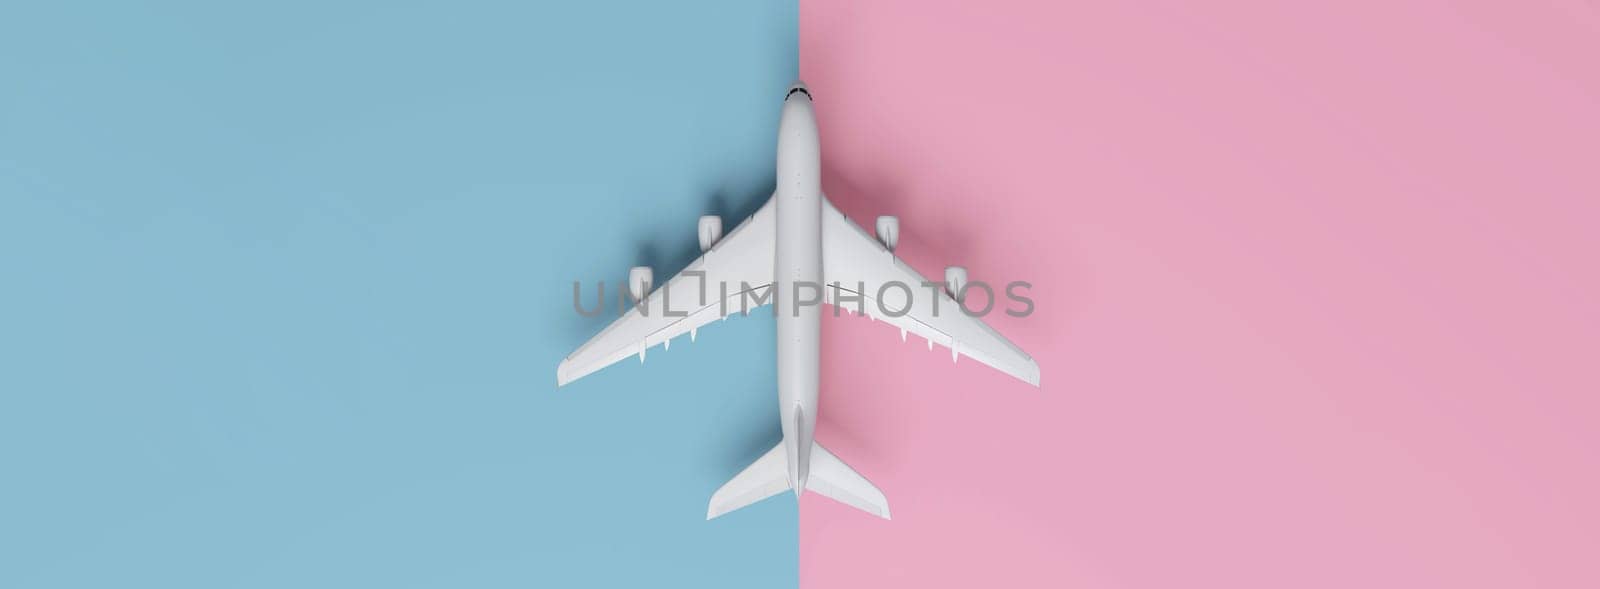 Travel concept with plane on pink and blue runway background with copy space. by ImagesRouges